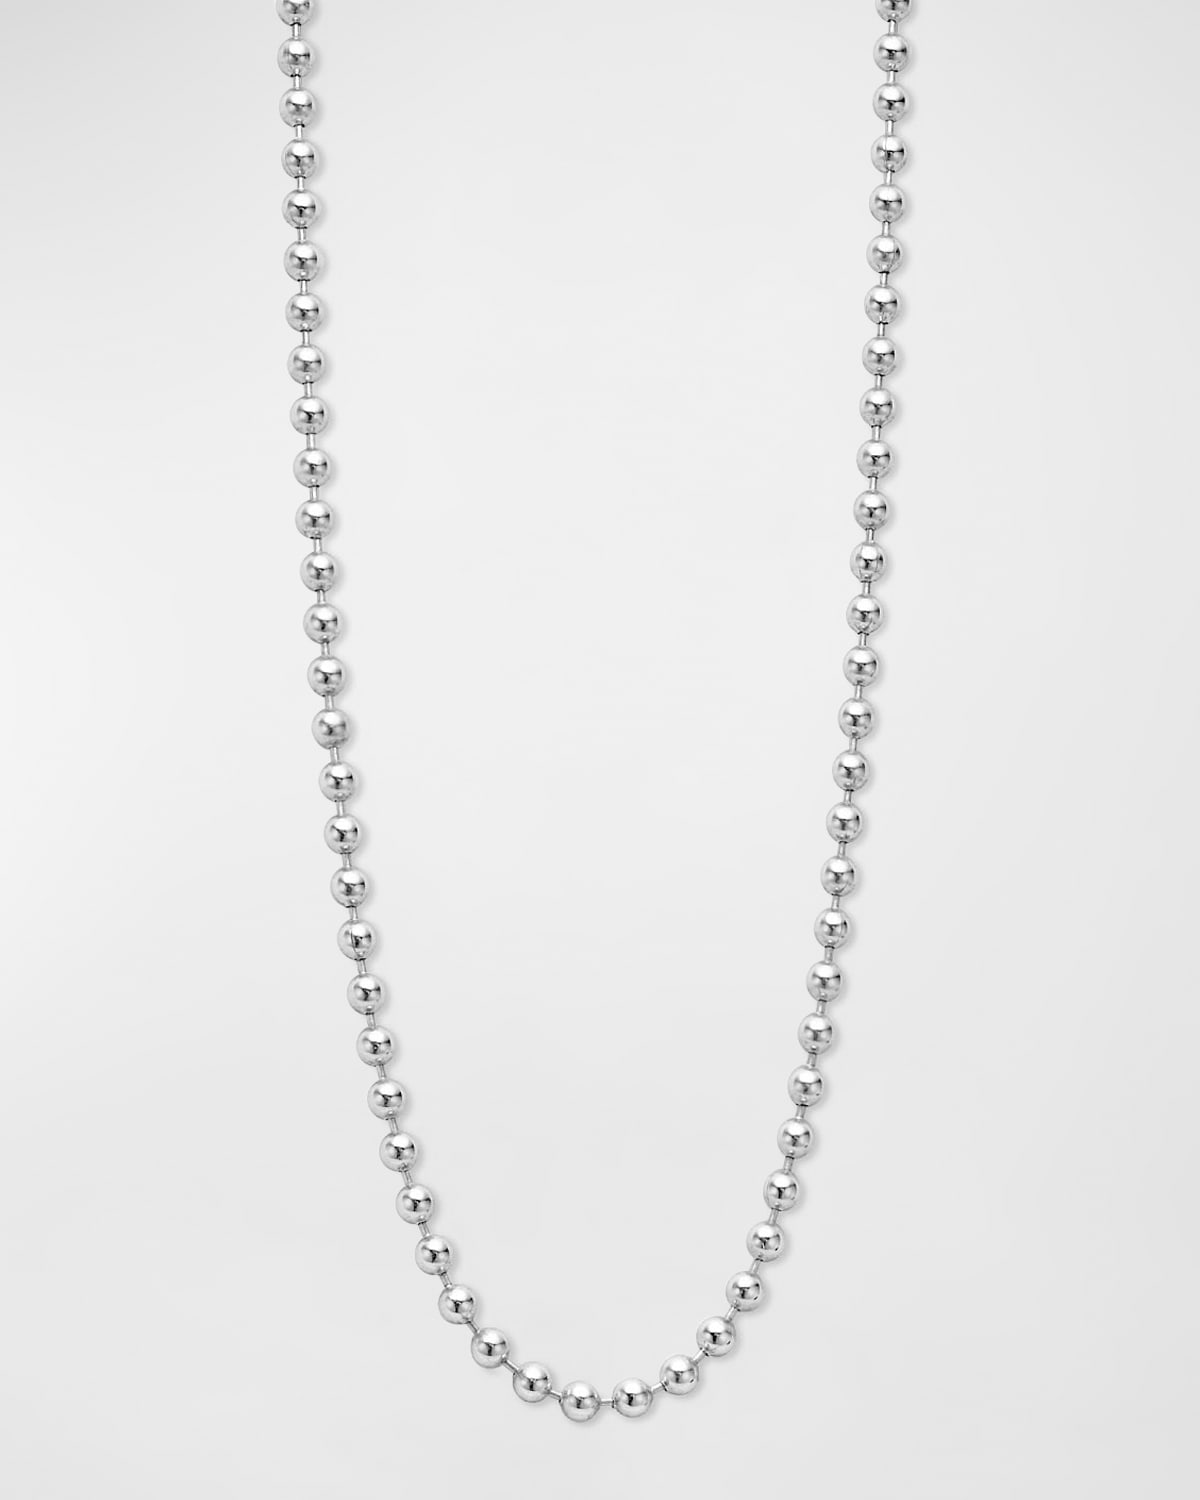 Two-Tone Beaded Toggle Necklace in 18K Gold and Sterling Silver